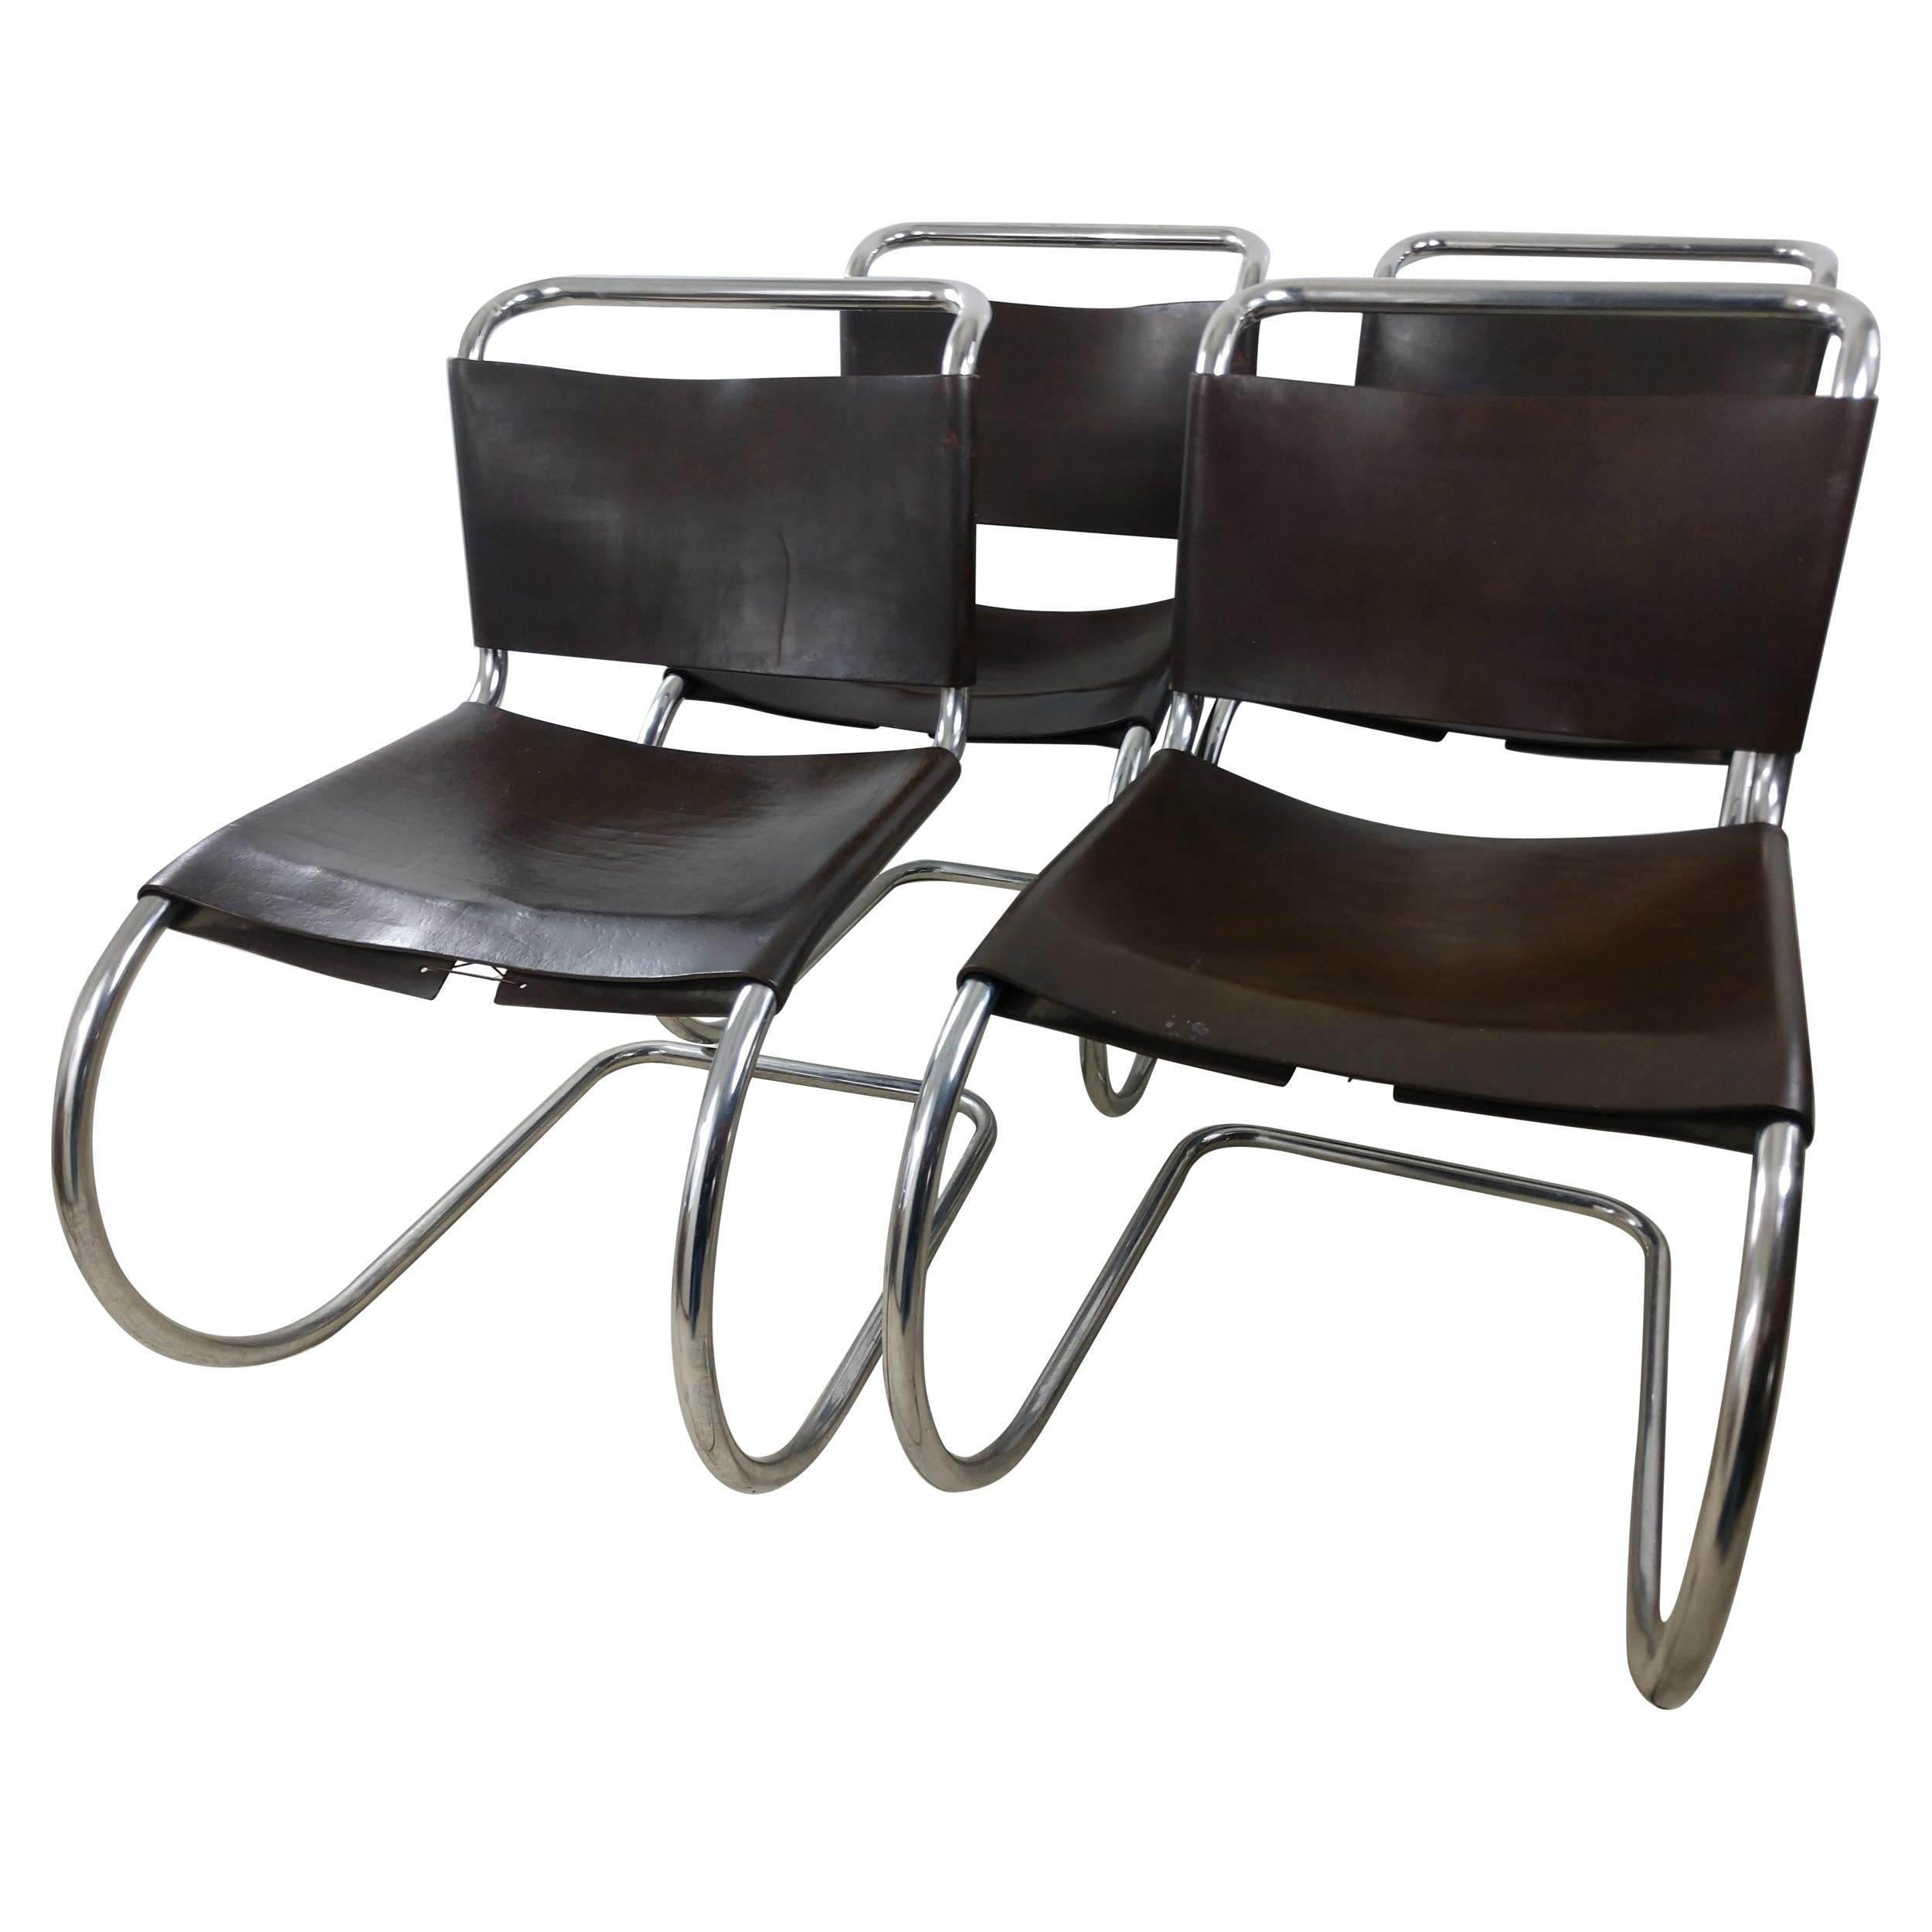 Set of 4 Ludwig Mies van der Rohe MR10 Dining Chairs Knoll